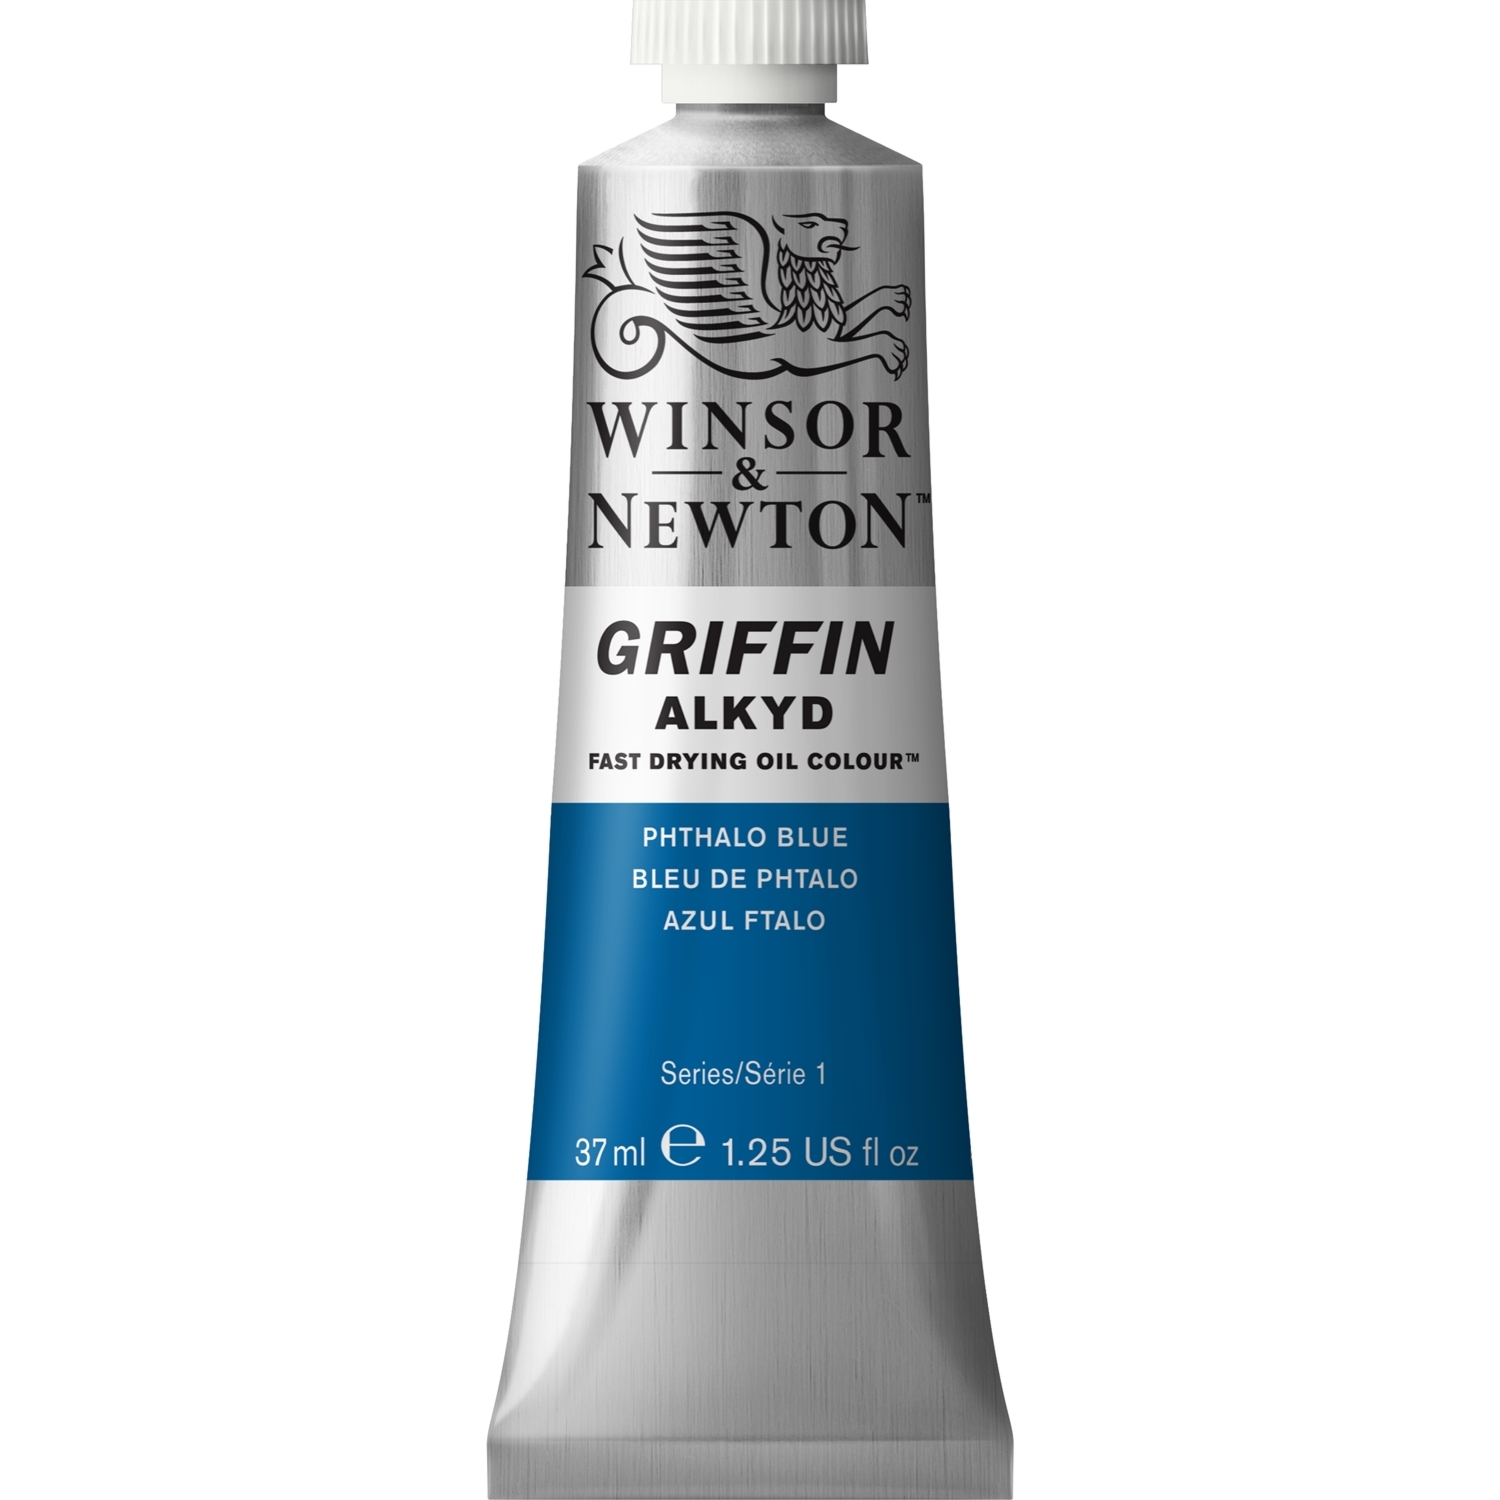 Winsor and Newton Griffin Alkyd Oil Colour - Phthalo Blue Image 1